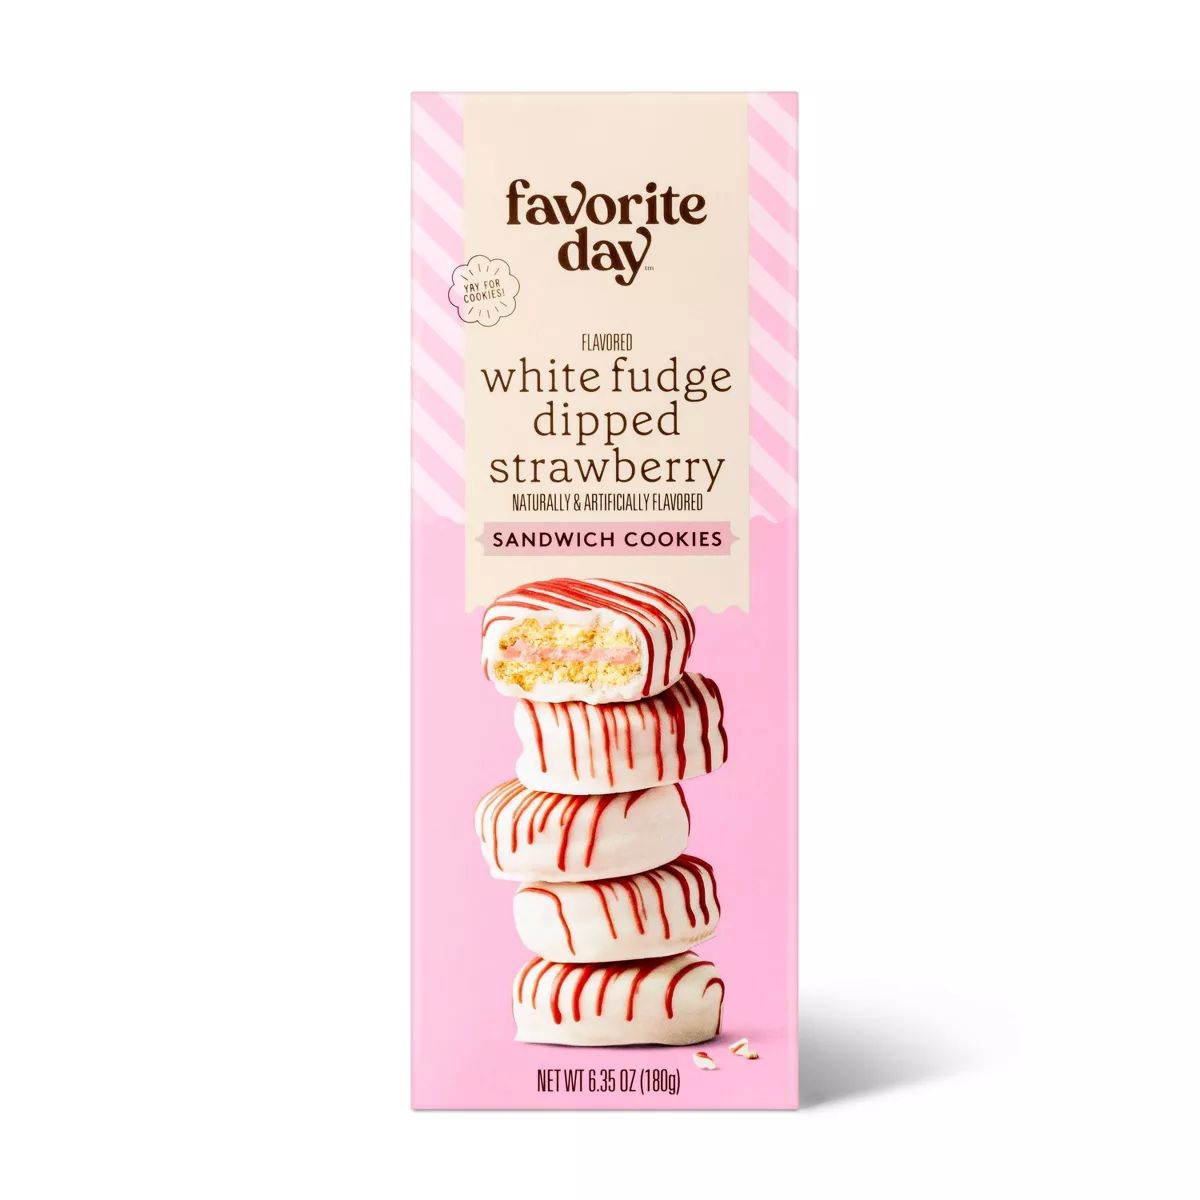 White Fudge Dipped Strawberry Sandwich Cookies - 6.35oz - Favorite Day™ | Target